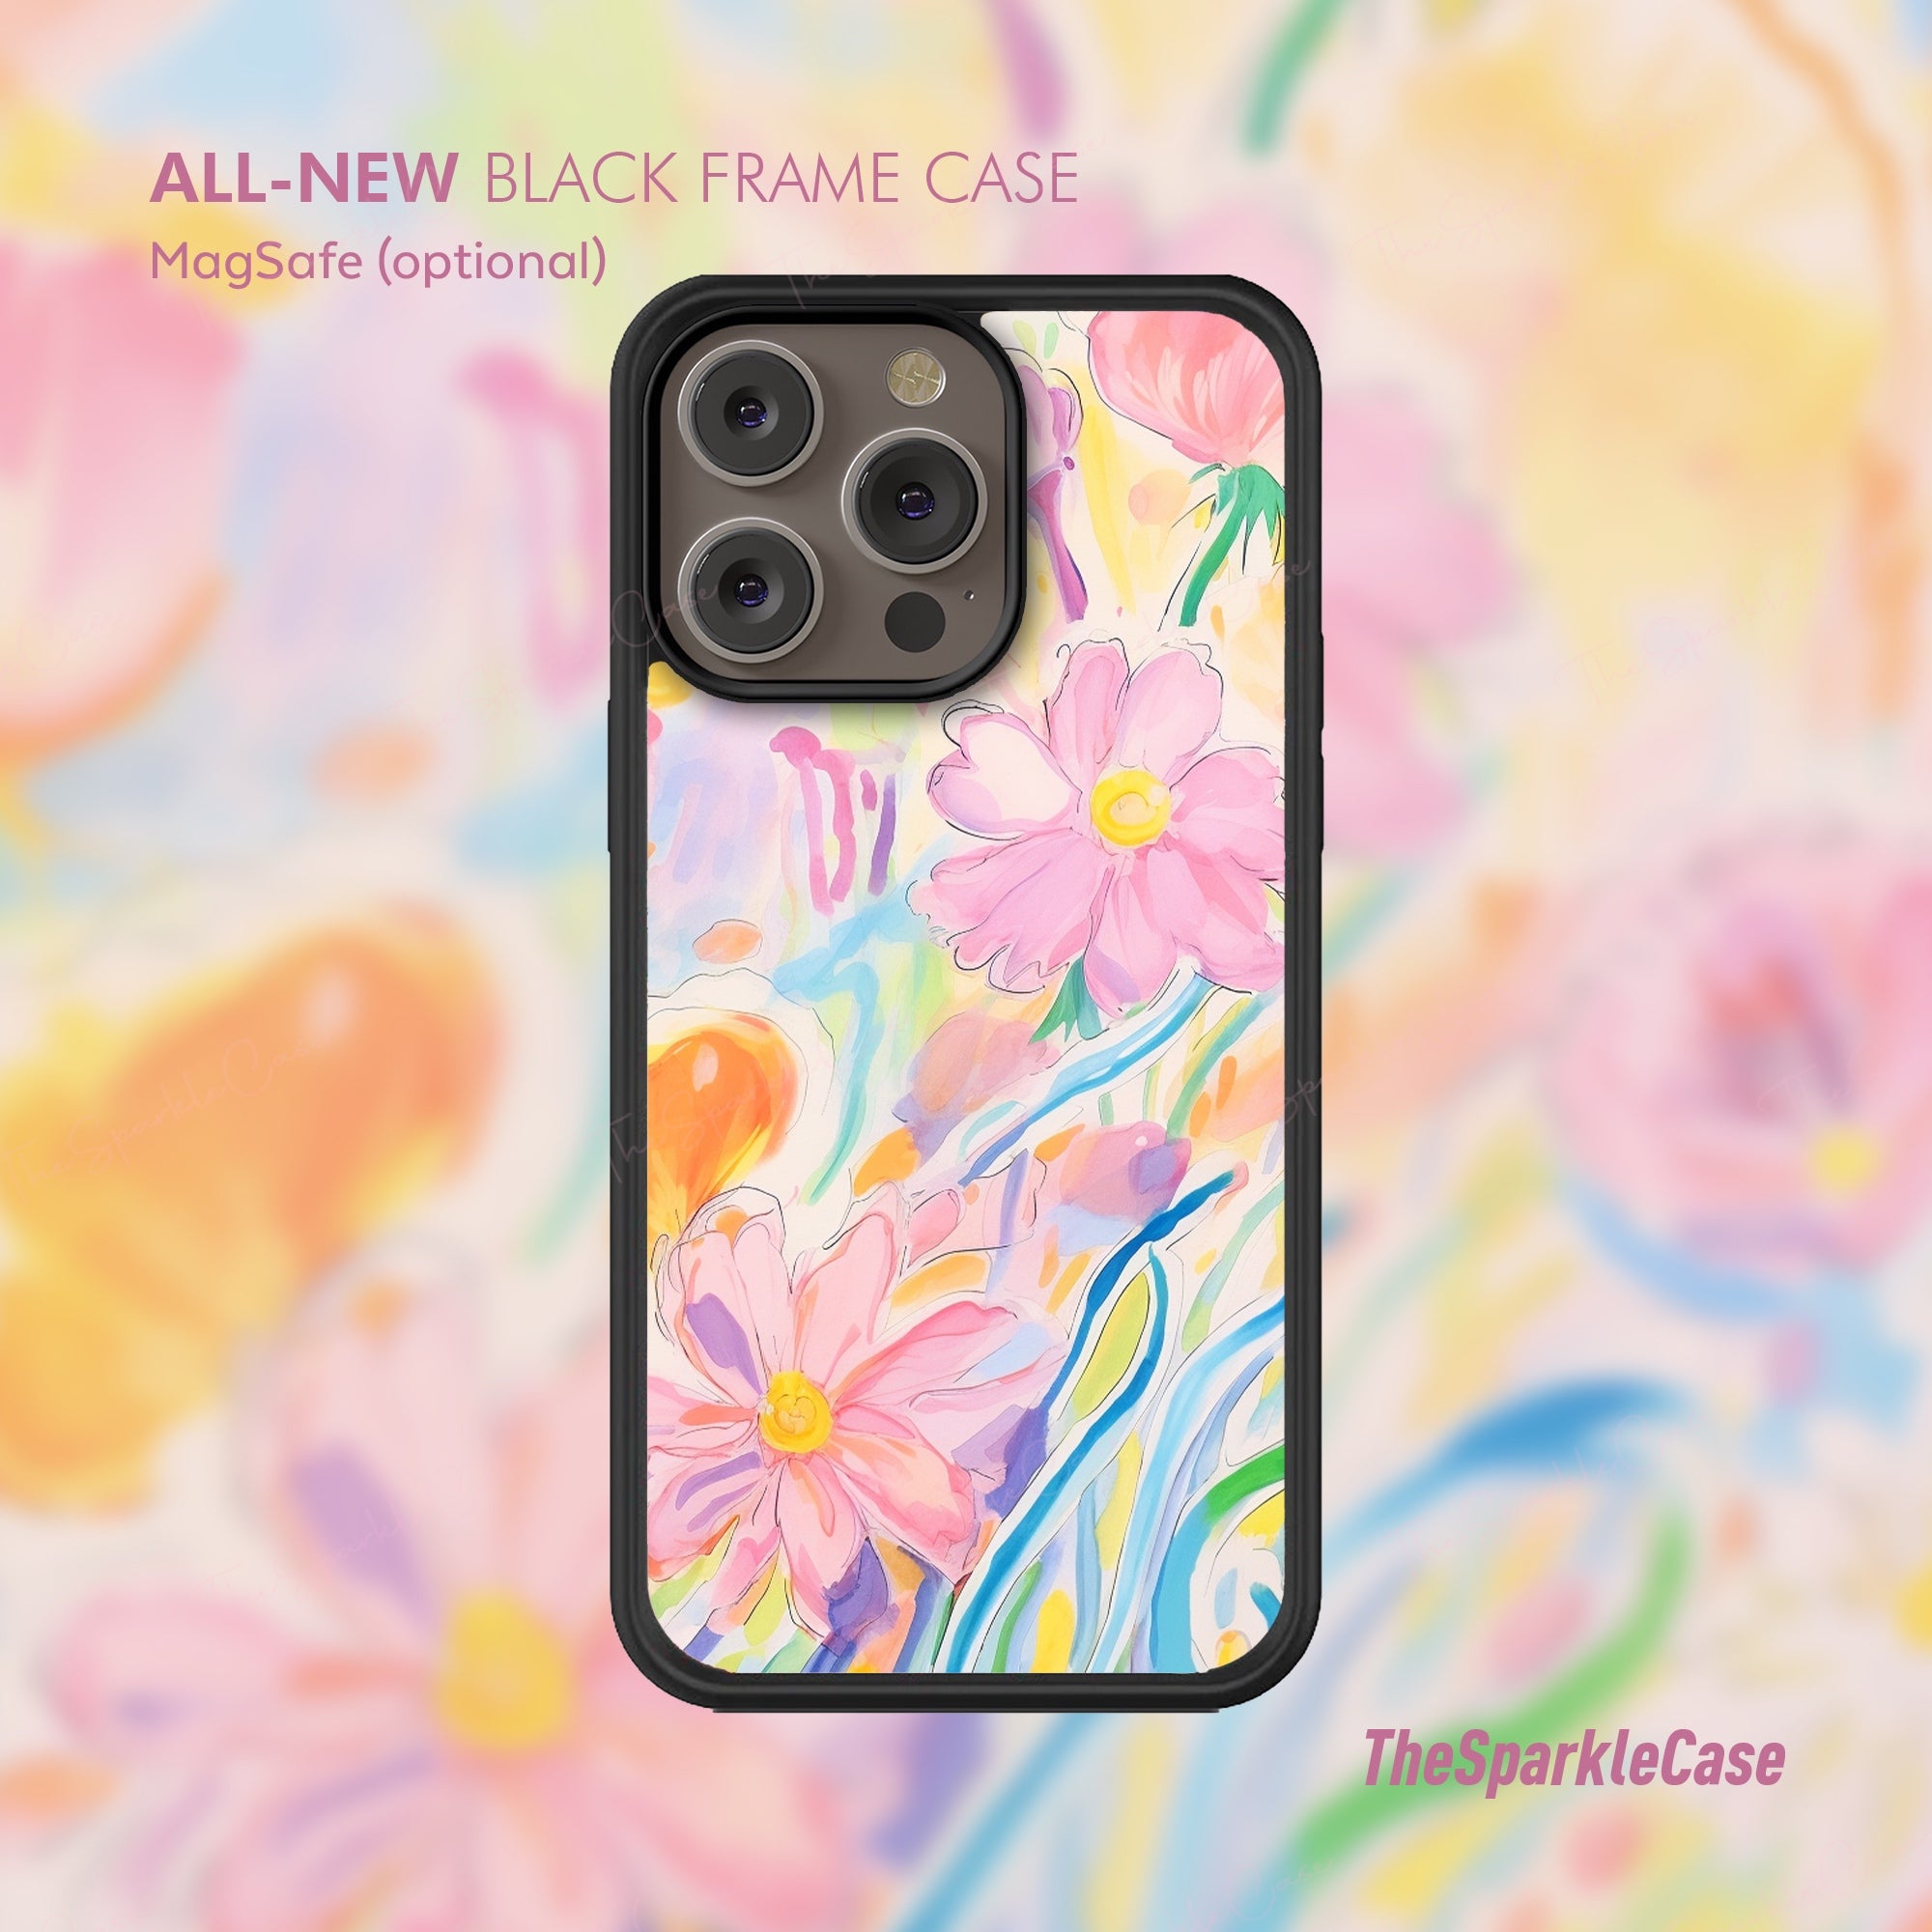 Colorful Floral ALL-NEW Black Frame case, Crayon Drawing MagSafe Case